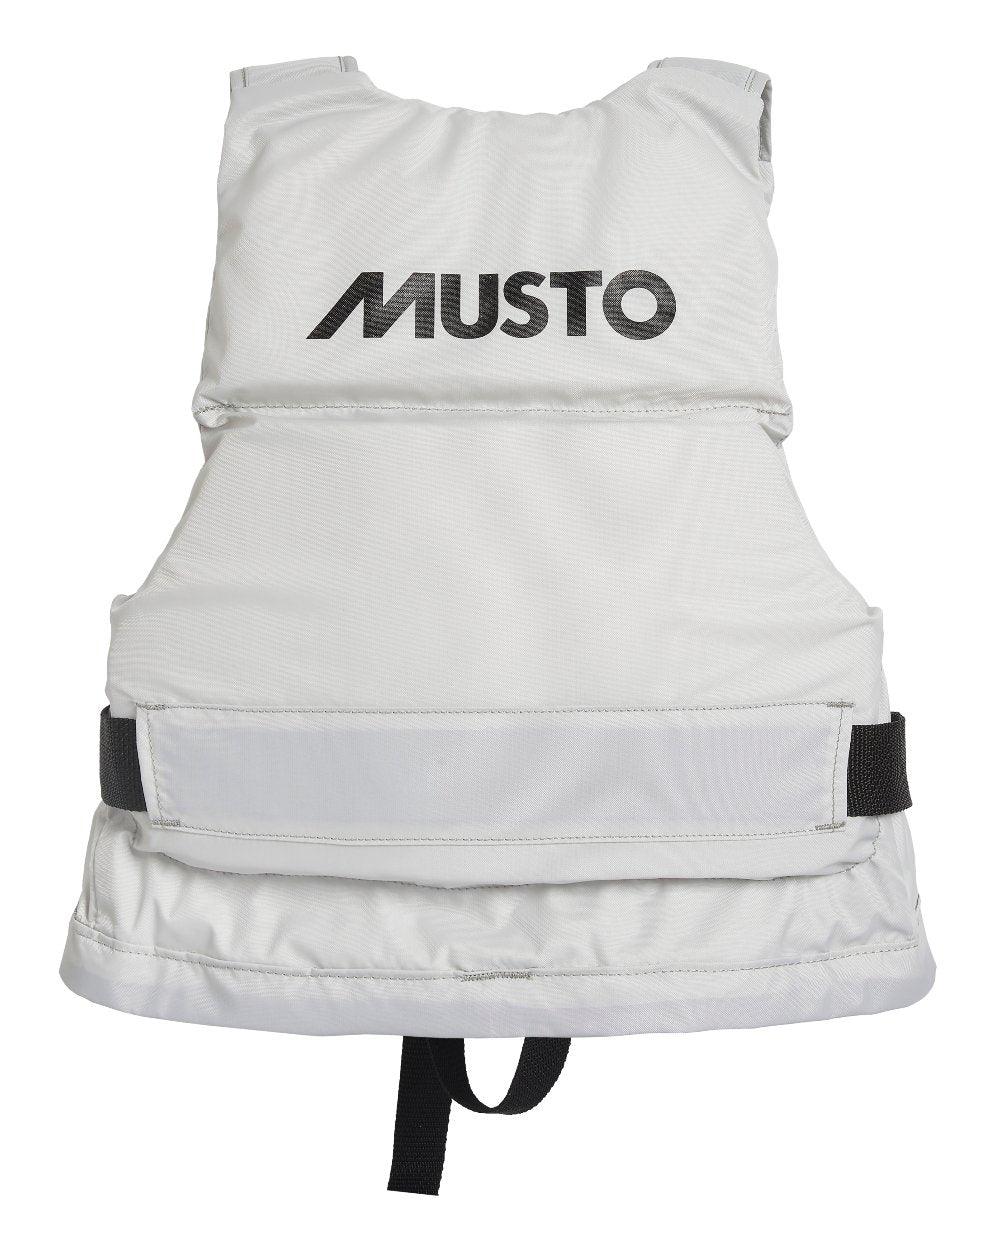 Platinum Coloured Musto Junior Buoyancy Aid On A White Background 